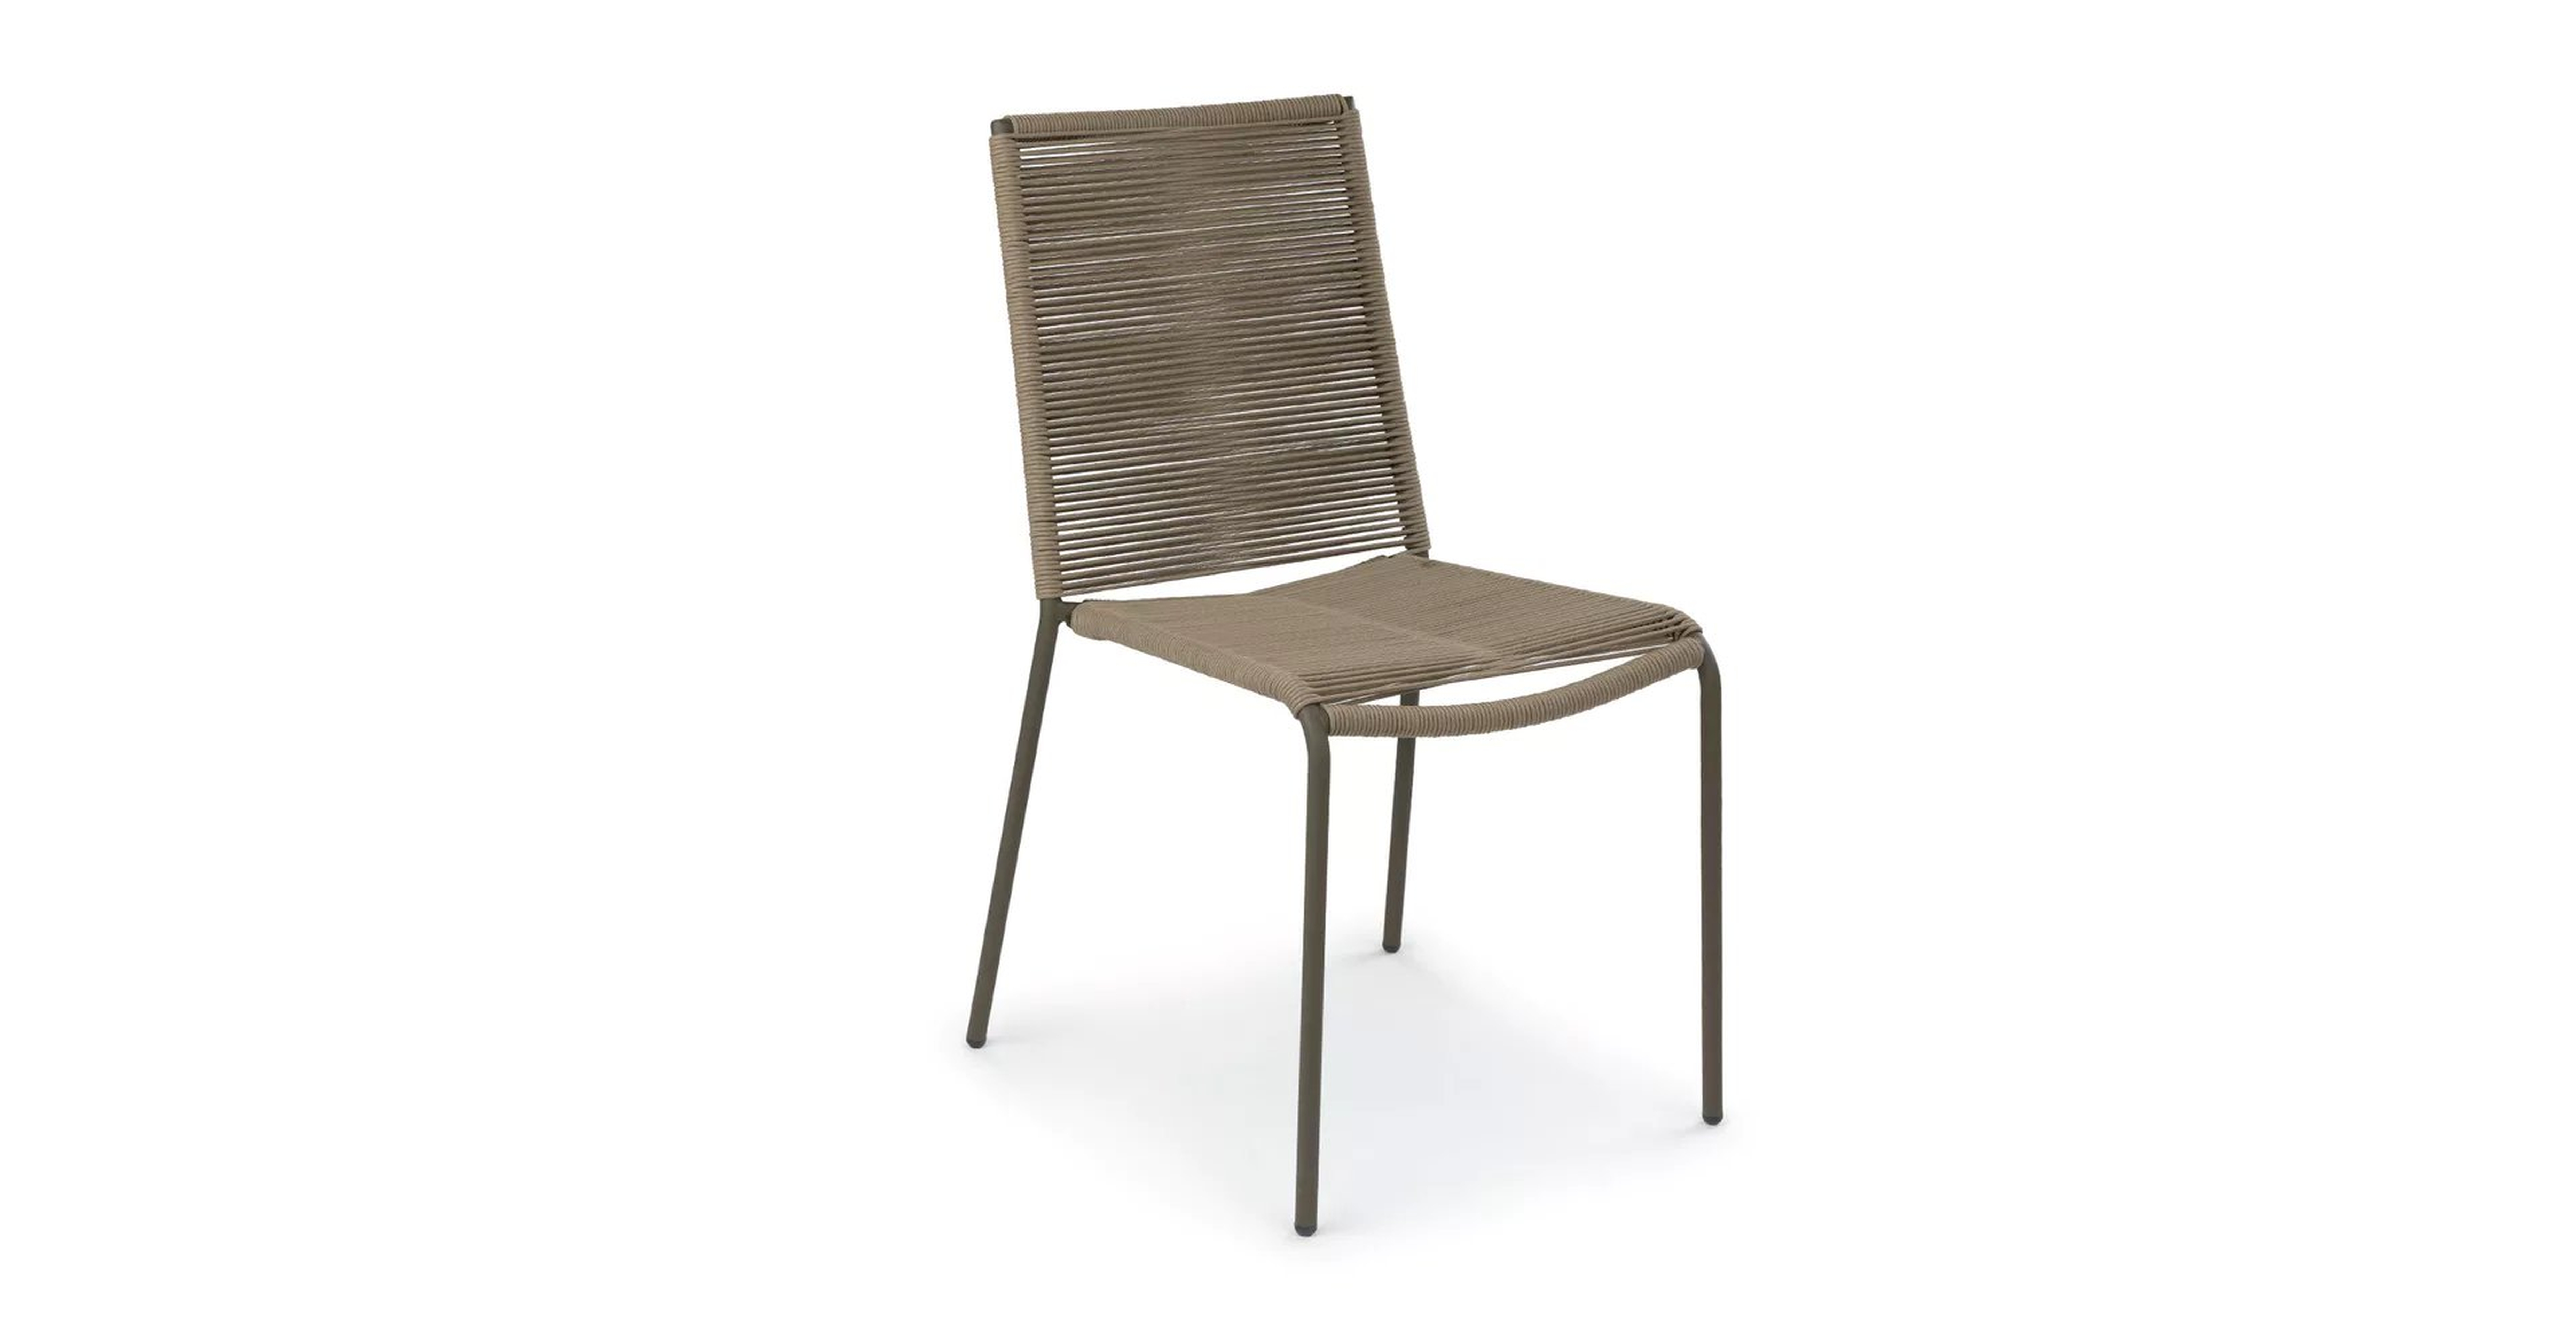 Zina grove green dining chair - Article